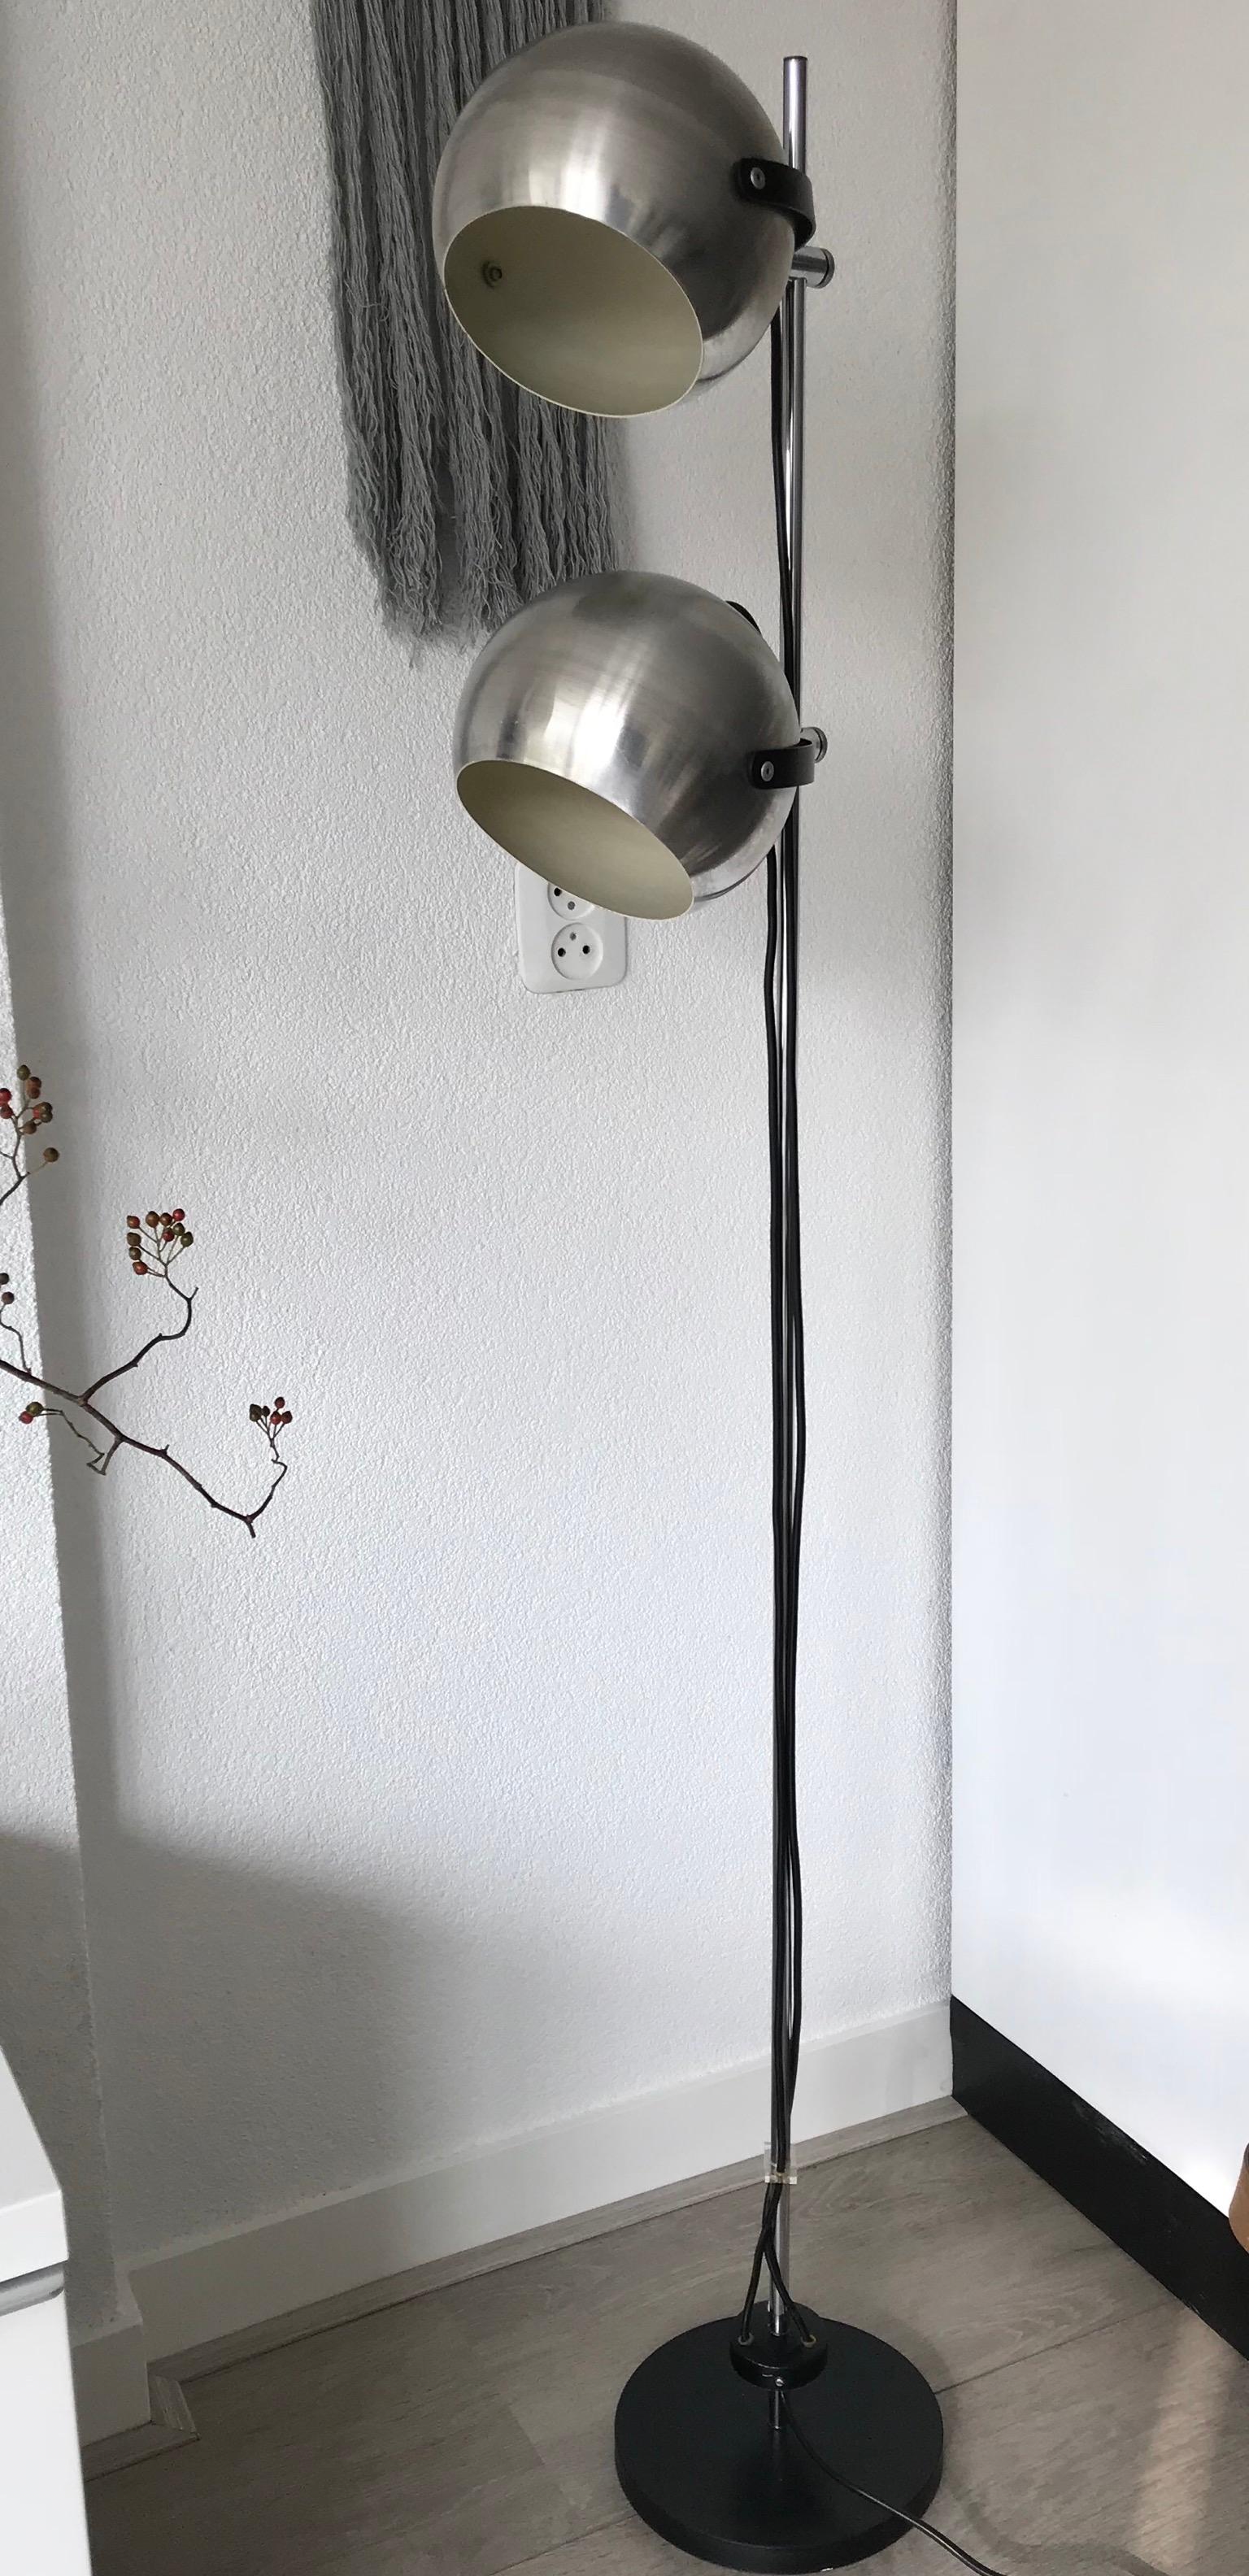 Stylish and practical floor lamp.

This quality made floor lamp of chrome and metal could be your perfect lighting solution. This timeless, midcentury design can be used for all kinds of purposes and thanks to the colors it can be placed in